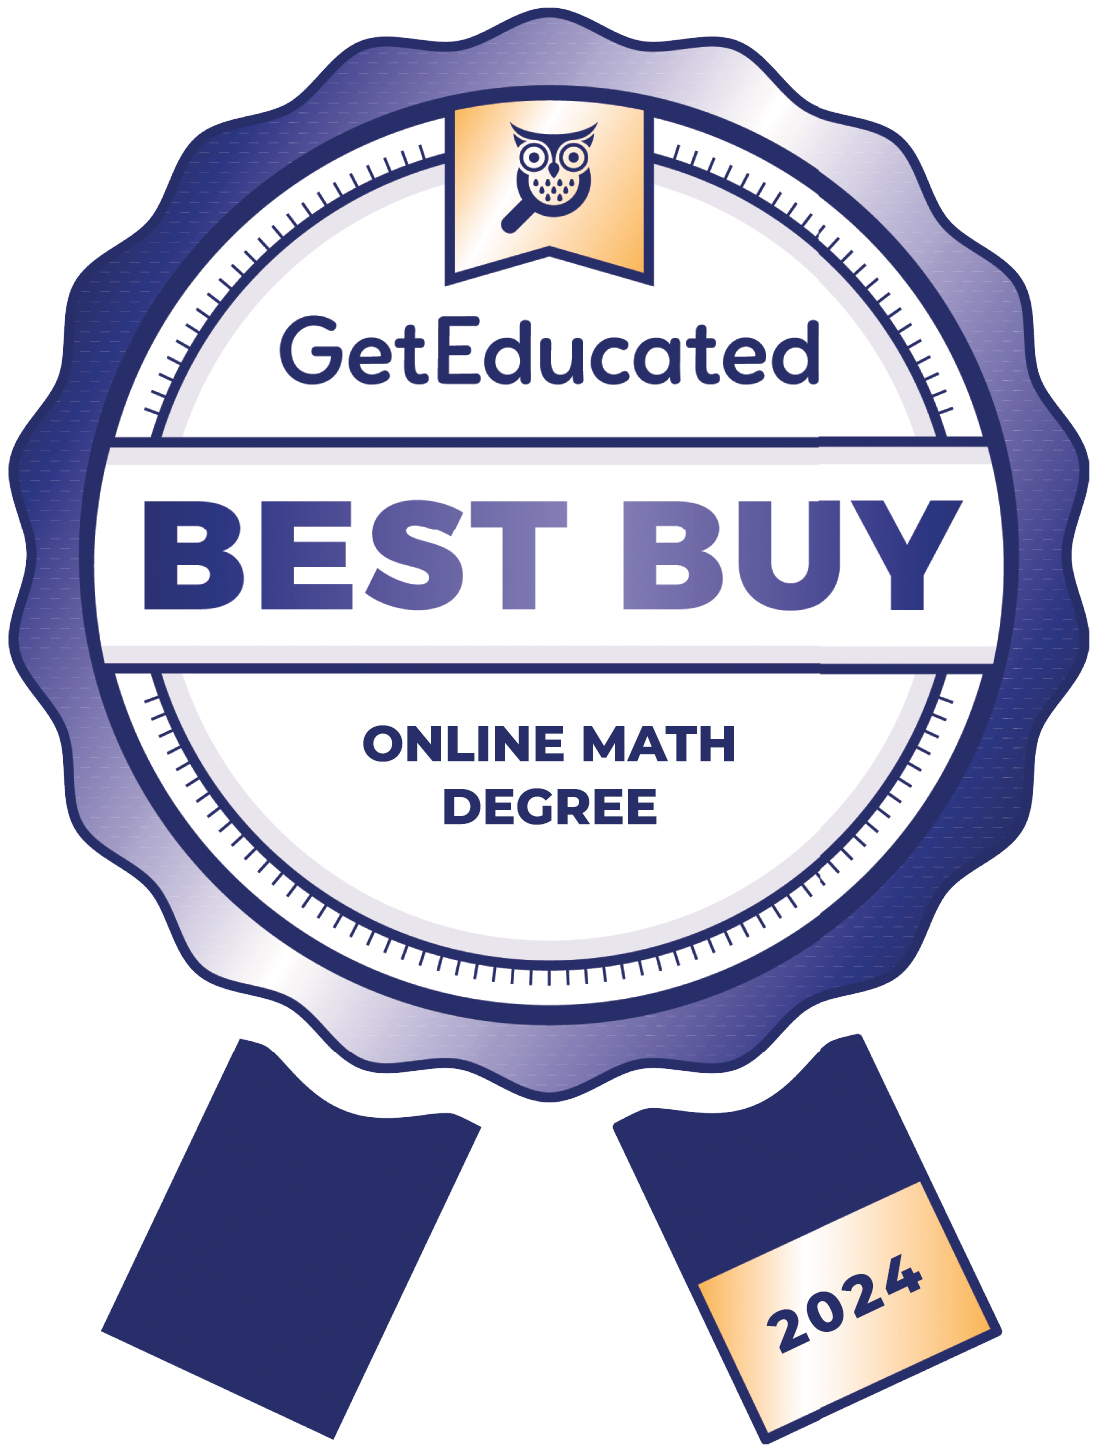 Rankings of the cheapest online math degree programs